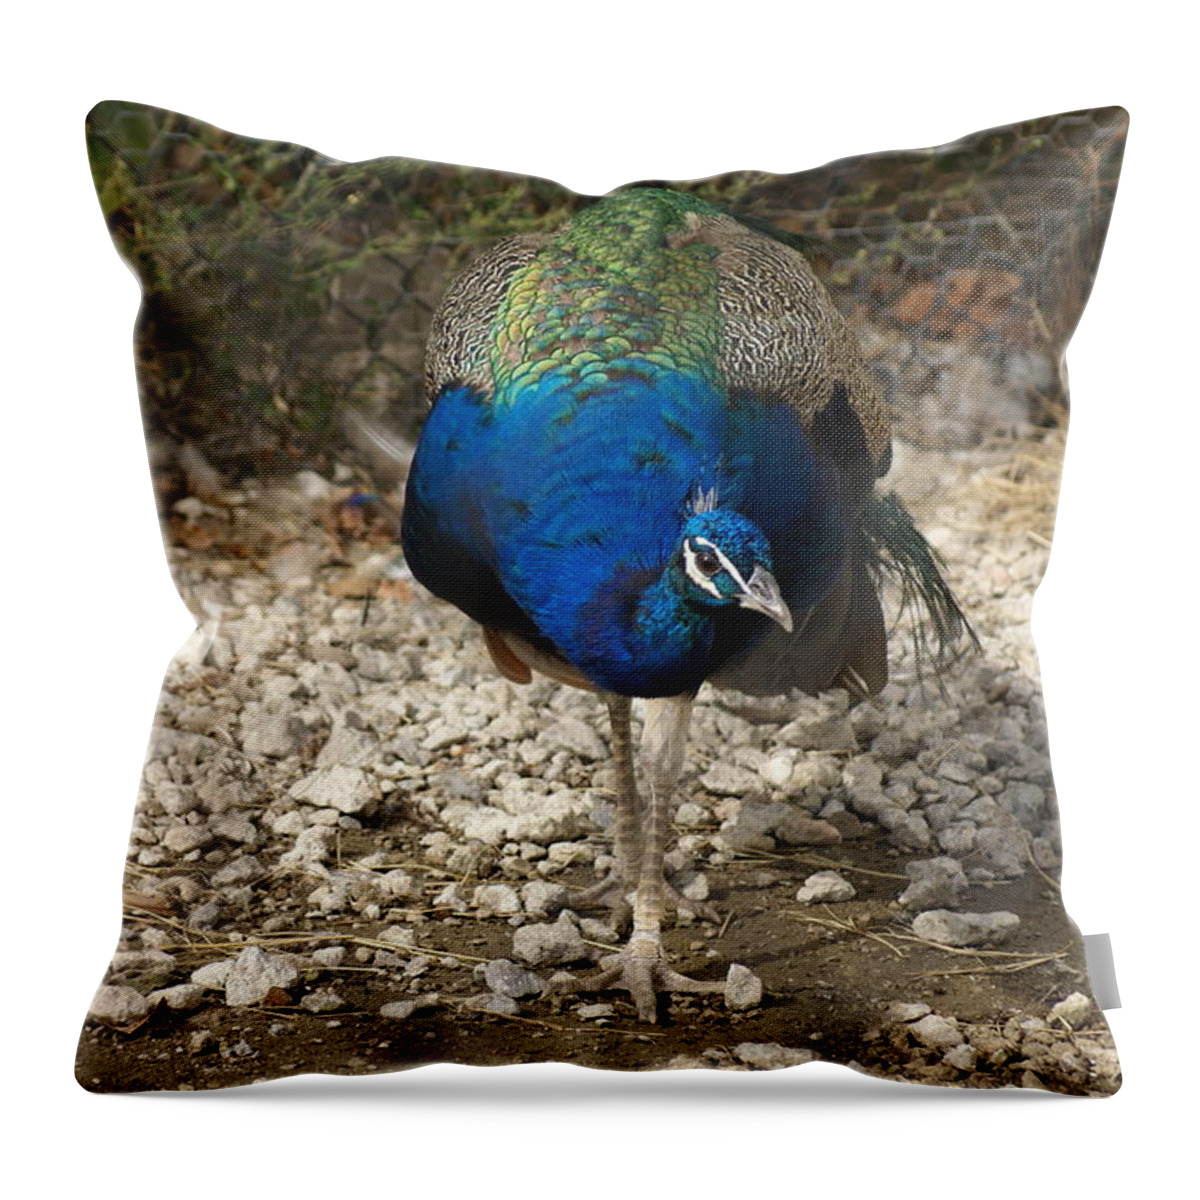  Throw Pillow featuring the photograph Peacock Strut by Heather E Harman